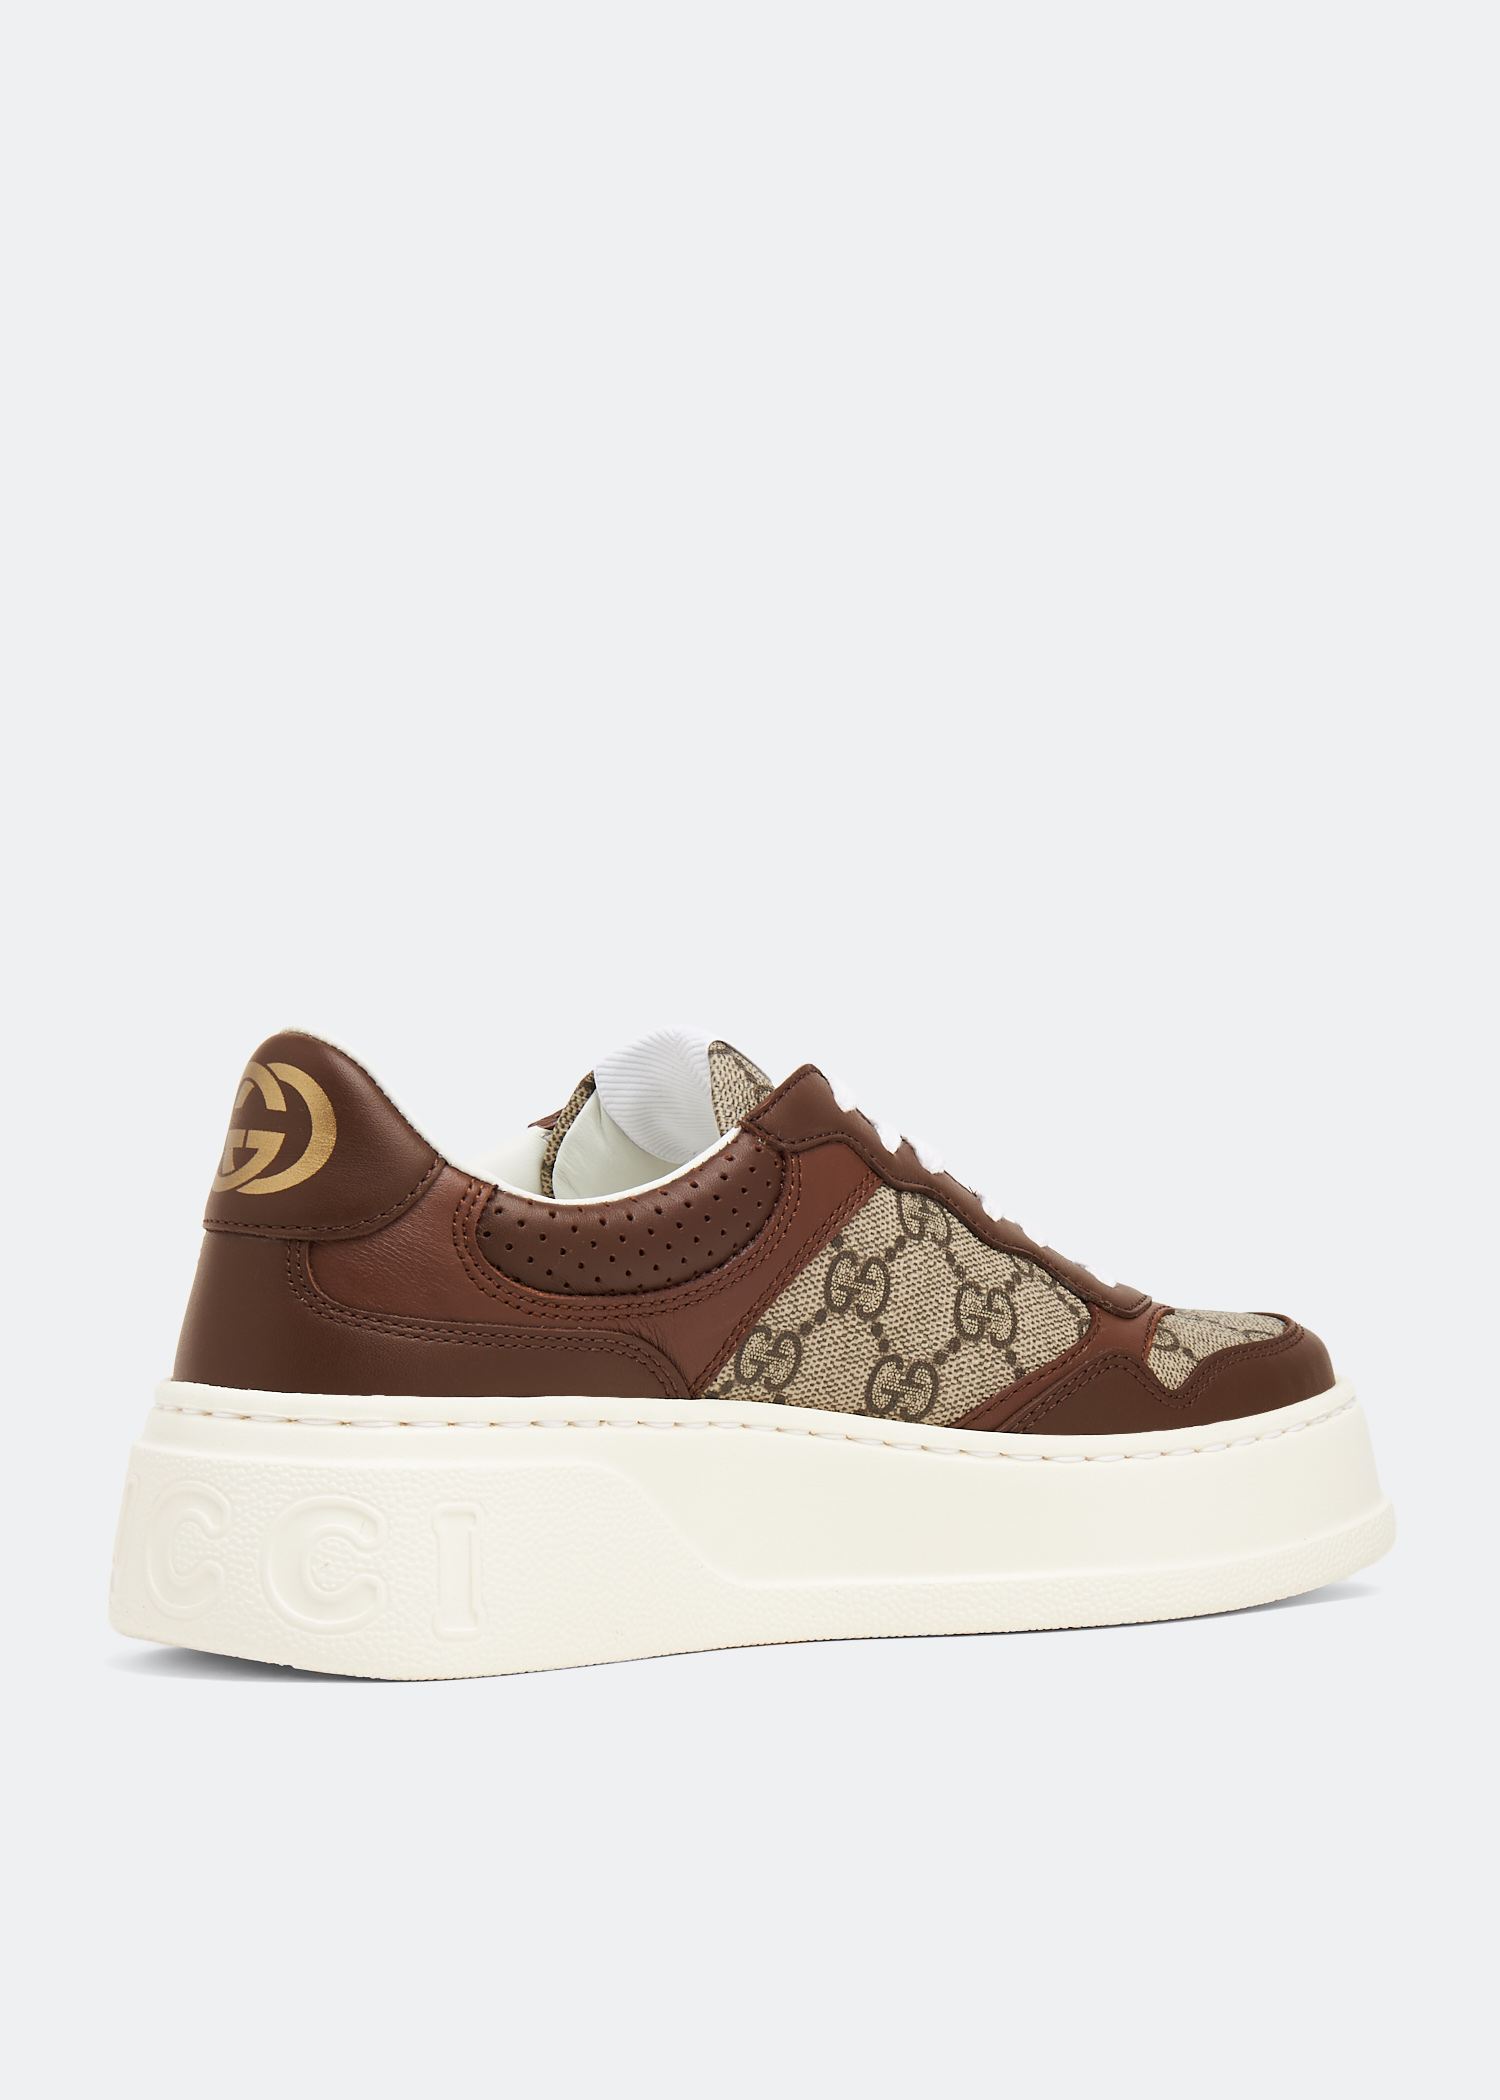 GUCCI Sneakers Women | Gucci Ace sneakers Beige | GUCCI 760774 FACMZ9746 -  Leam Luxury Shopping Online